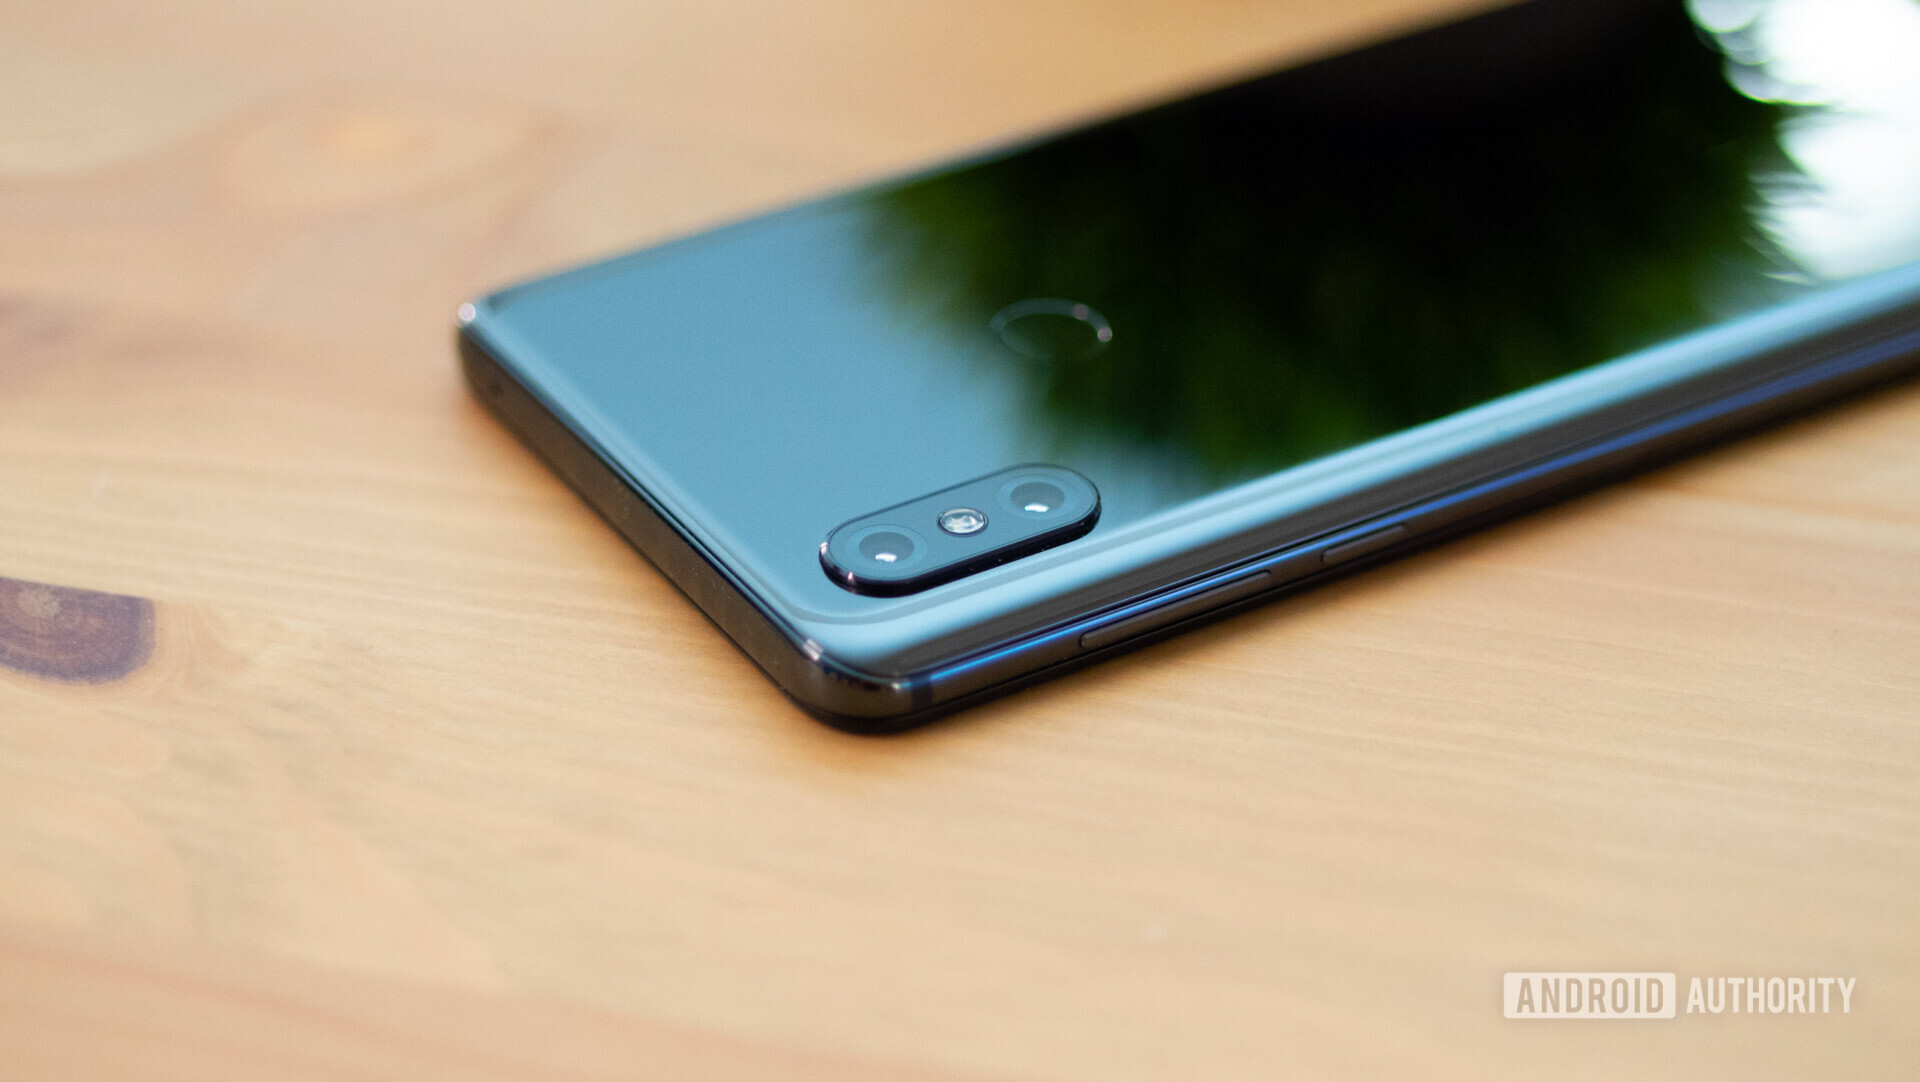 Backside of the Xiaomi Mi mix 3 focusing on the cameras.